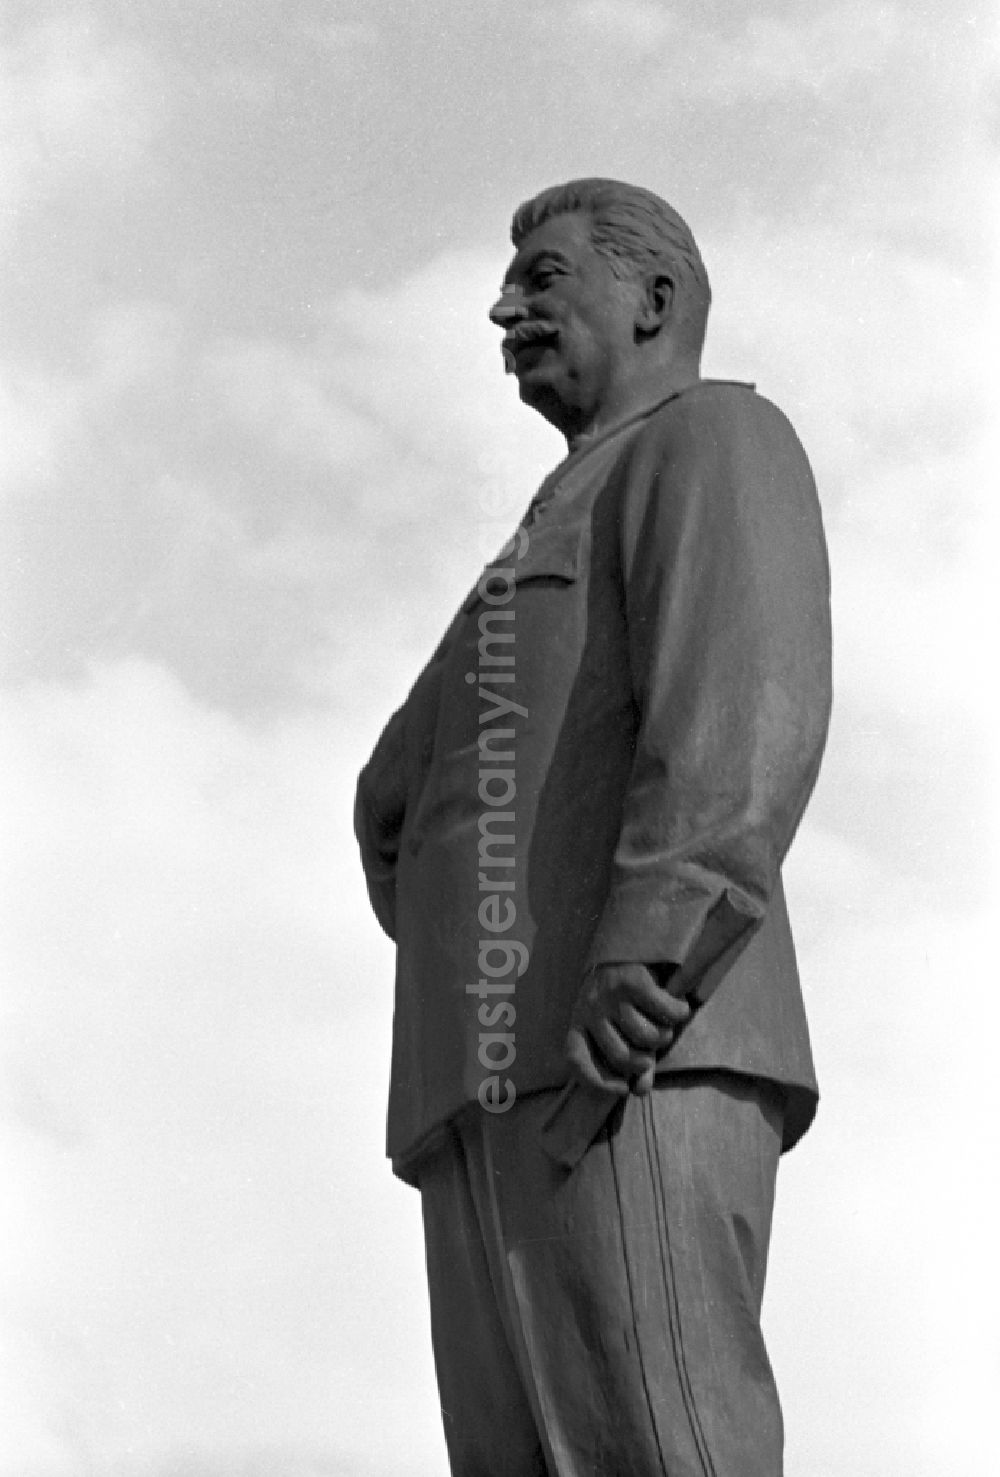 GDR photo archive: Berlin - The bronze Stalin monument of the Soviet dictator Josef Stalin stood in the Stalinallee (now Karl-Marx-Allee) named after him between Andreasstrasse and Koppenstrasse opposite the German Sports Hall in the Friedrichshain district of East Berlin in the territory of the former GDR, German Democratic Republic